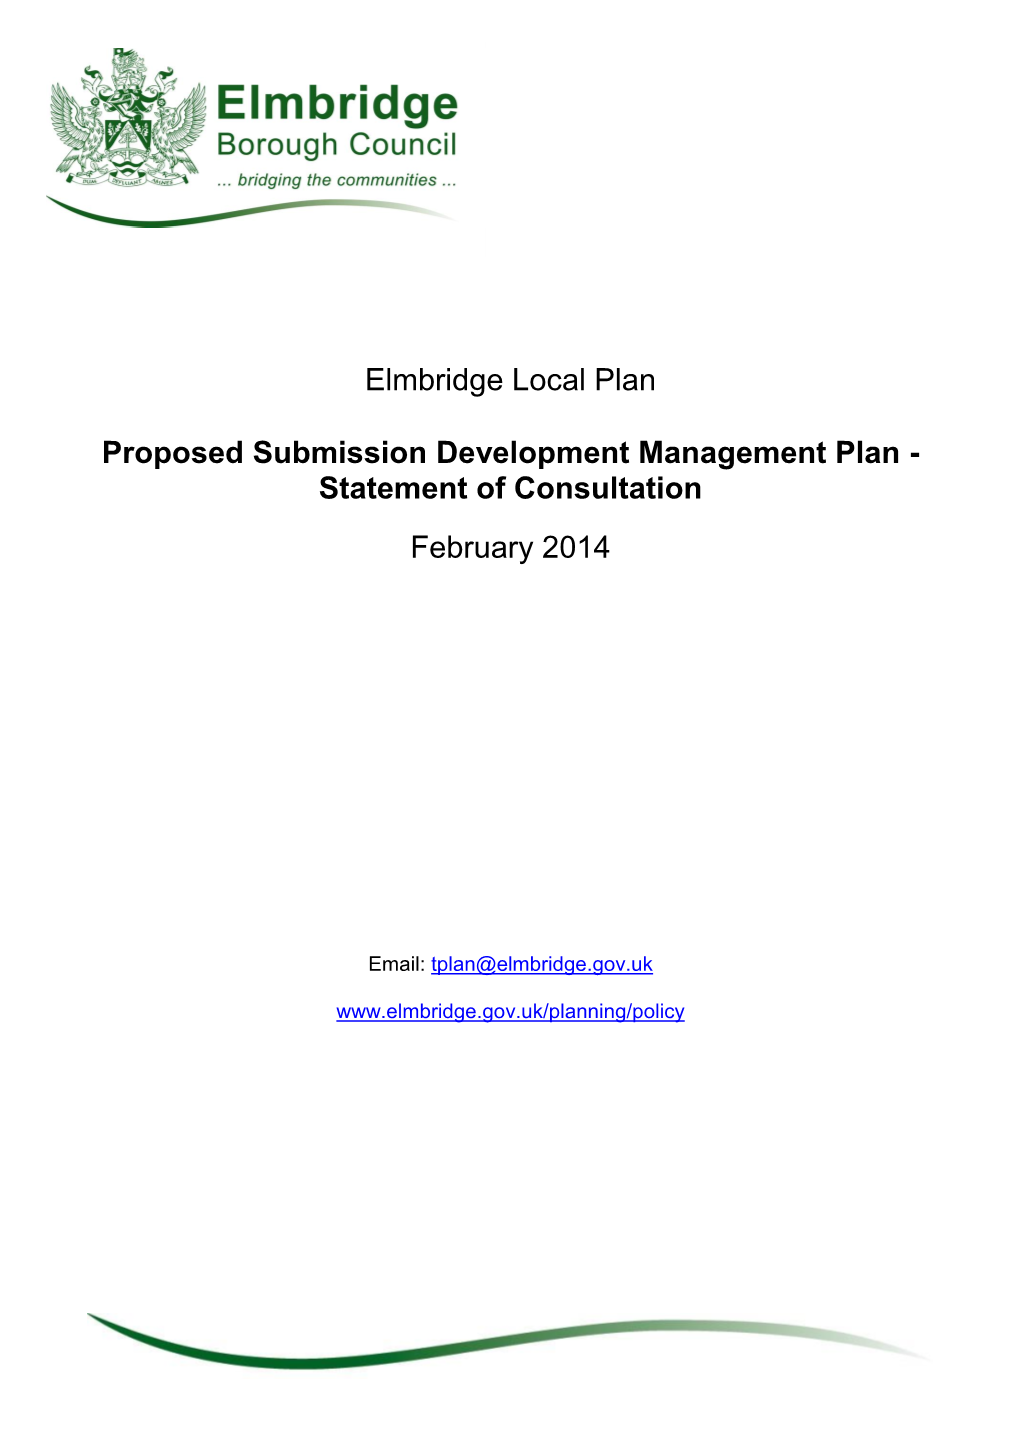 Statement of Consultation February 2014